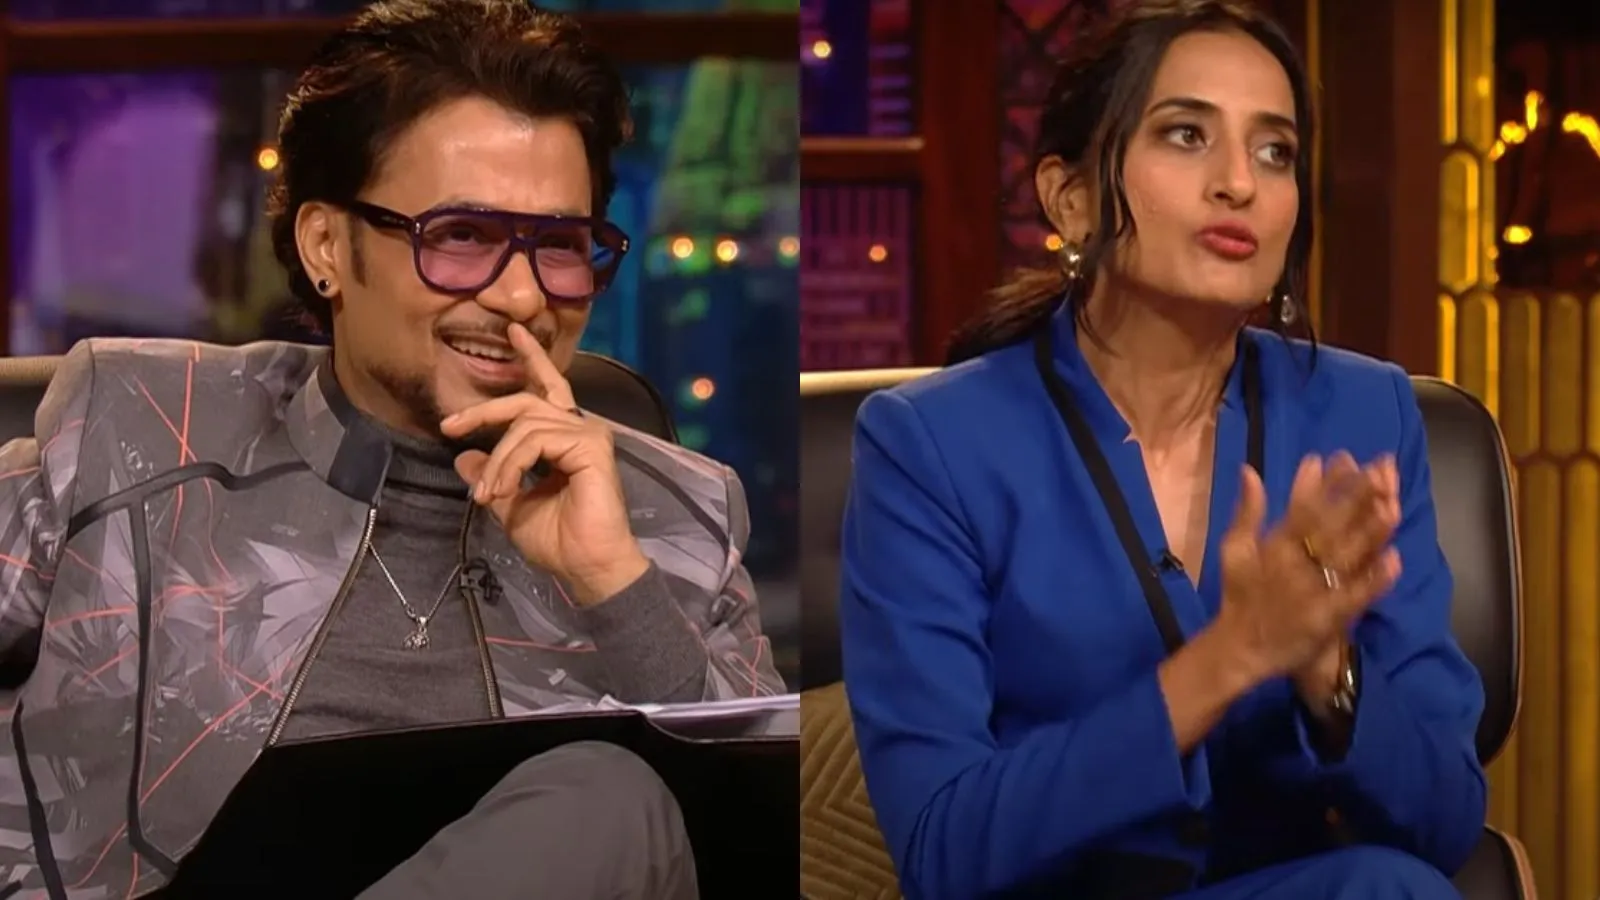 Anupam Mittal, Vineeta Singh, and others have a hearty laugh over sexual furniture pitch on Shark Tank India